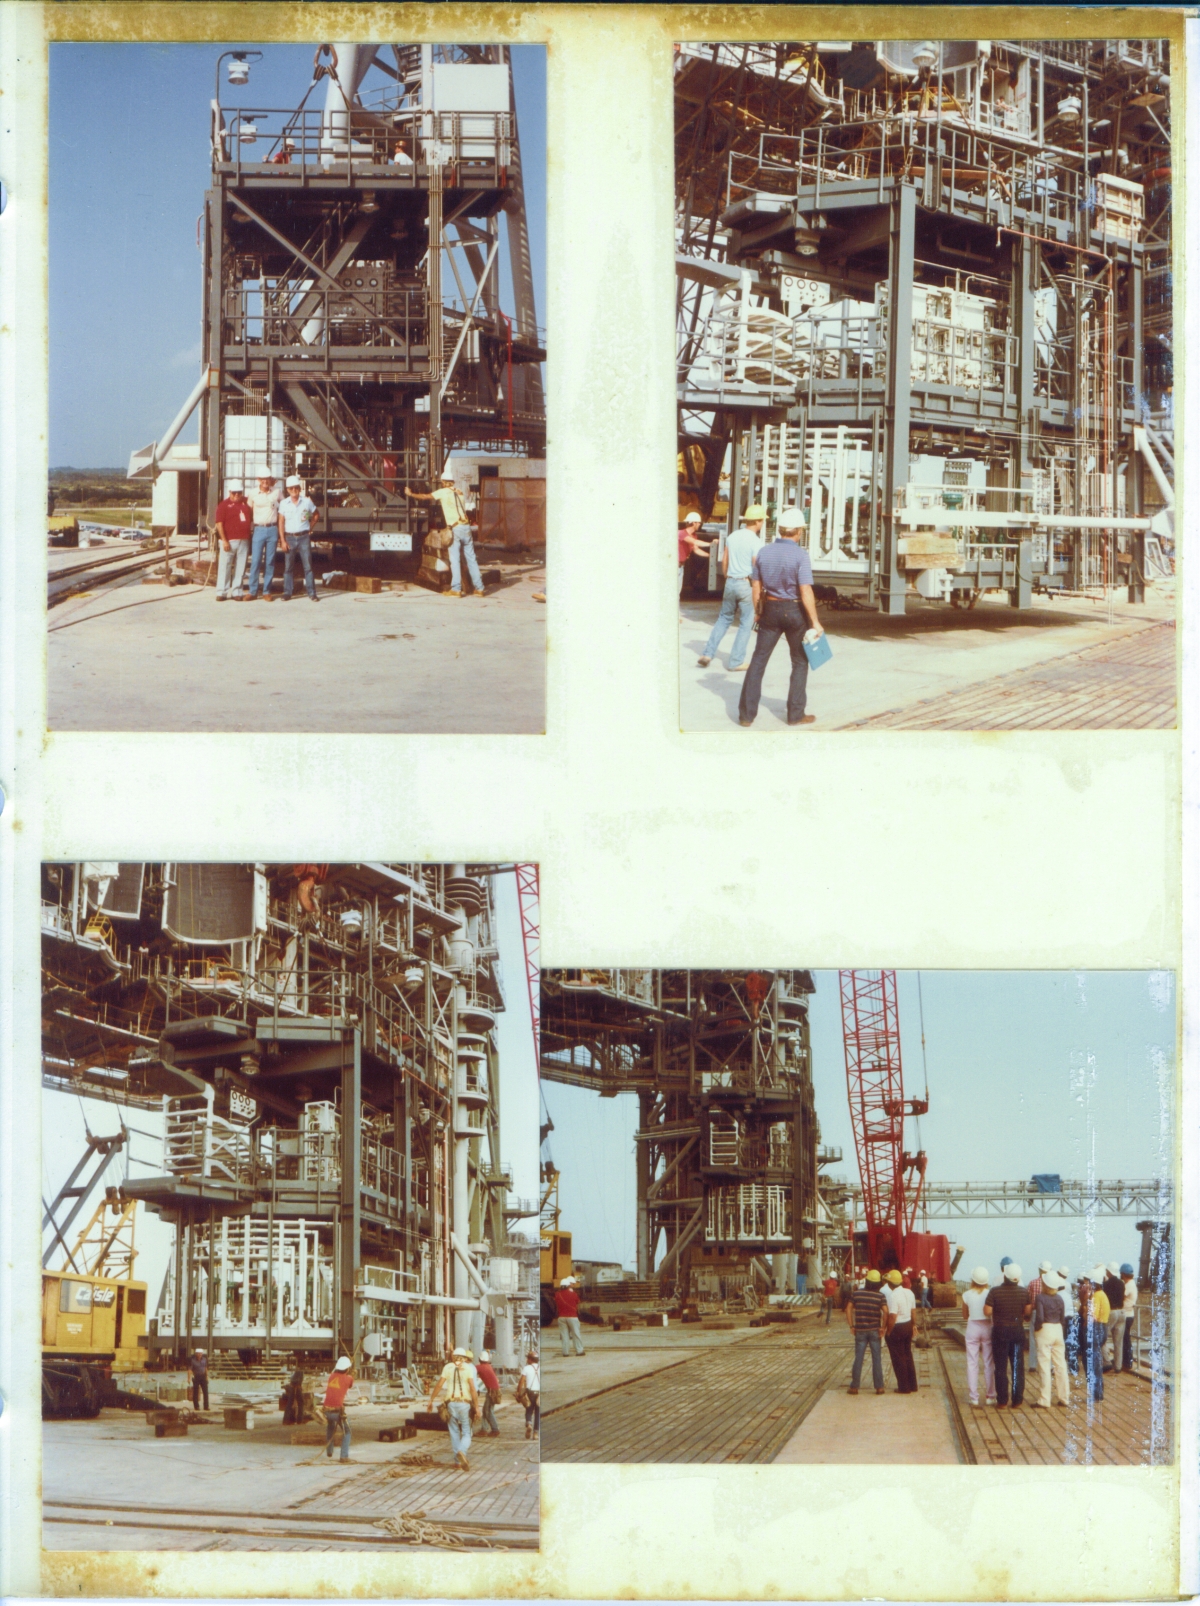 OMBUU Arm lift, page 1. The Orbiter Mid Body Umbilical Unit is lifted into place on the Rotating Service Structure at Launch Complex 39-B, Kennedy Space Center, Florida.